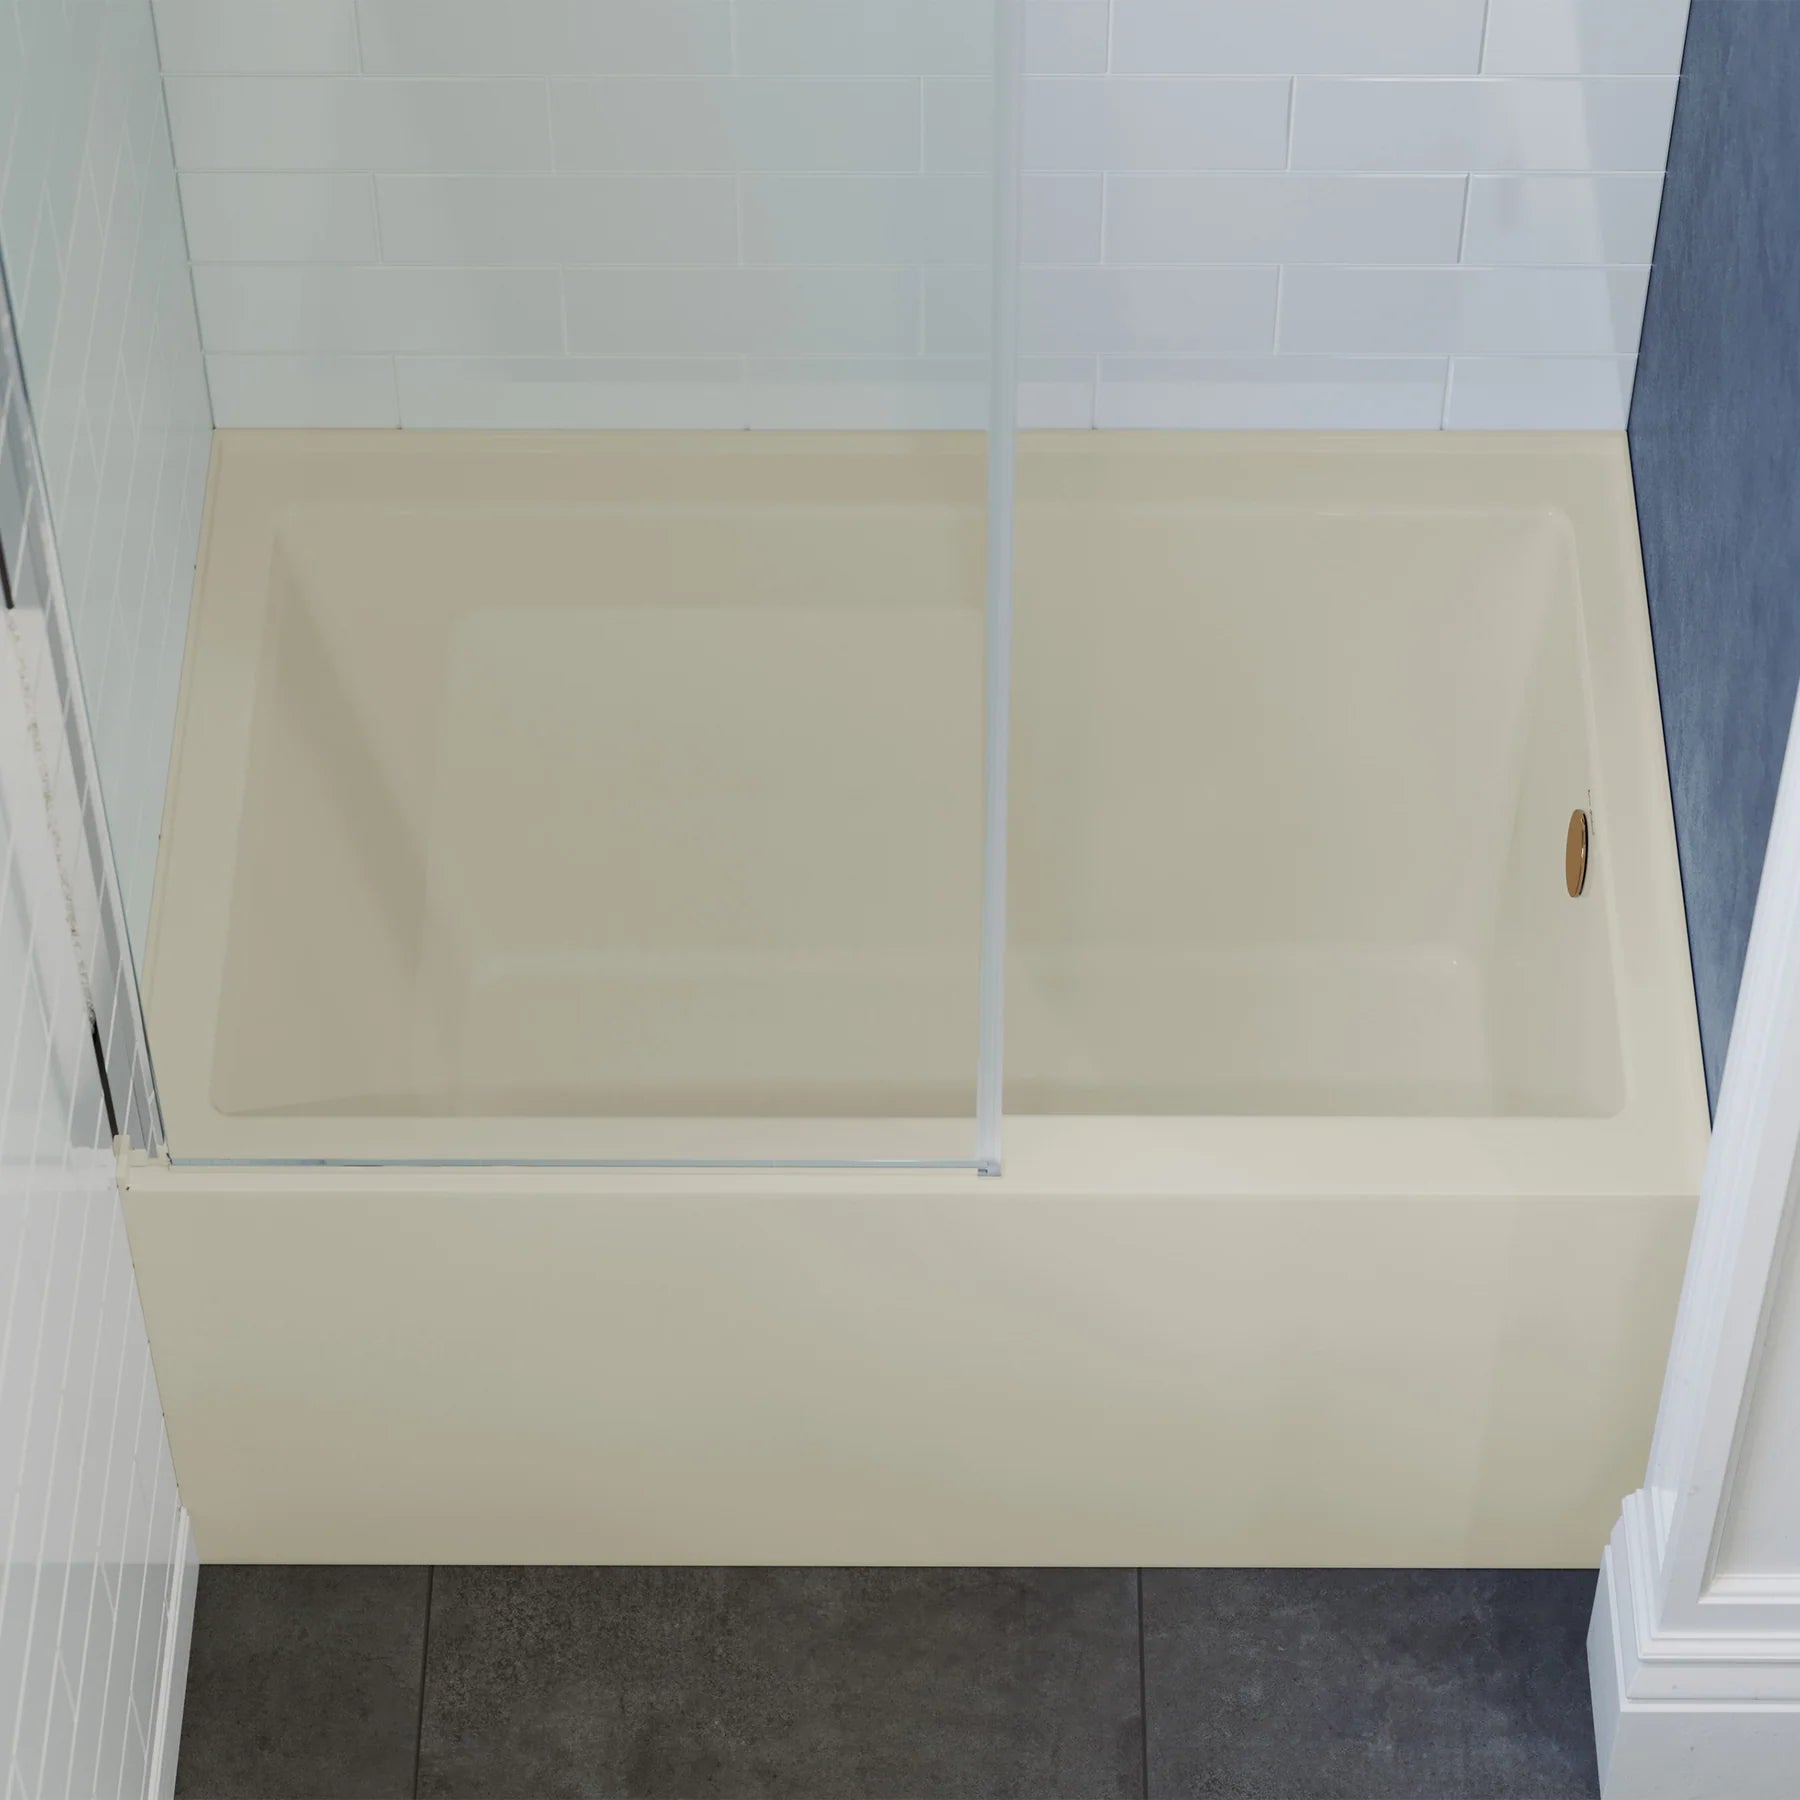 Swiss Madison Voltaire 48" X 32" Right-Hand Drain Alcove Bathtub with Apron in Bisque - SM-AB551BQ